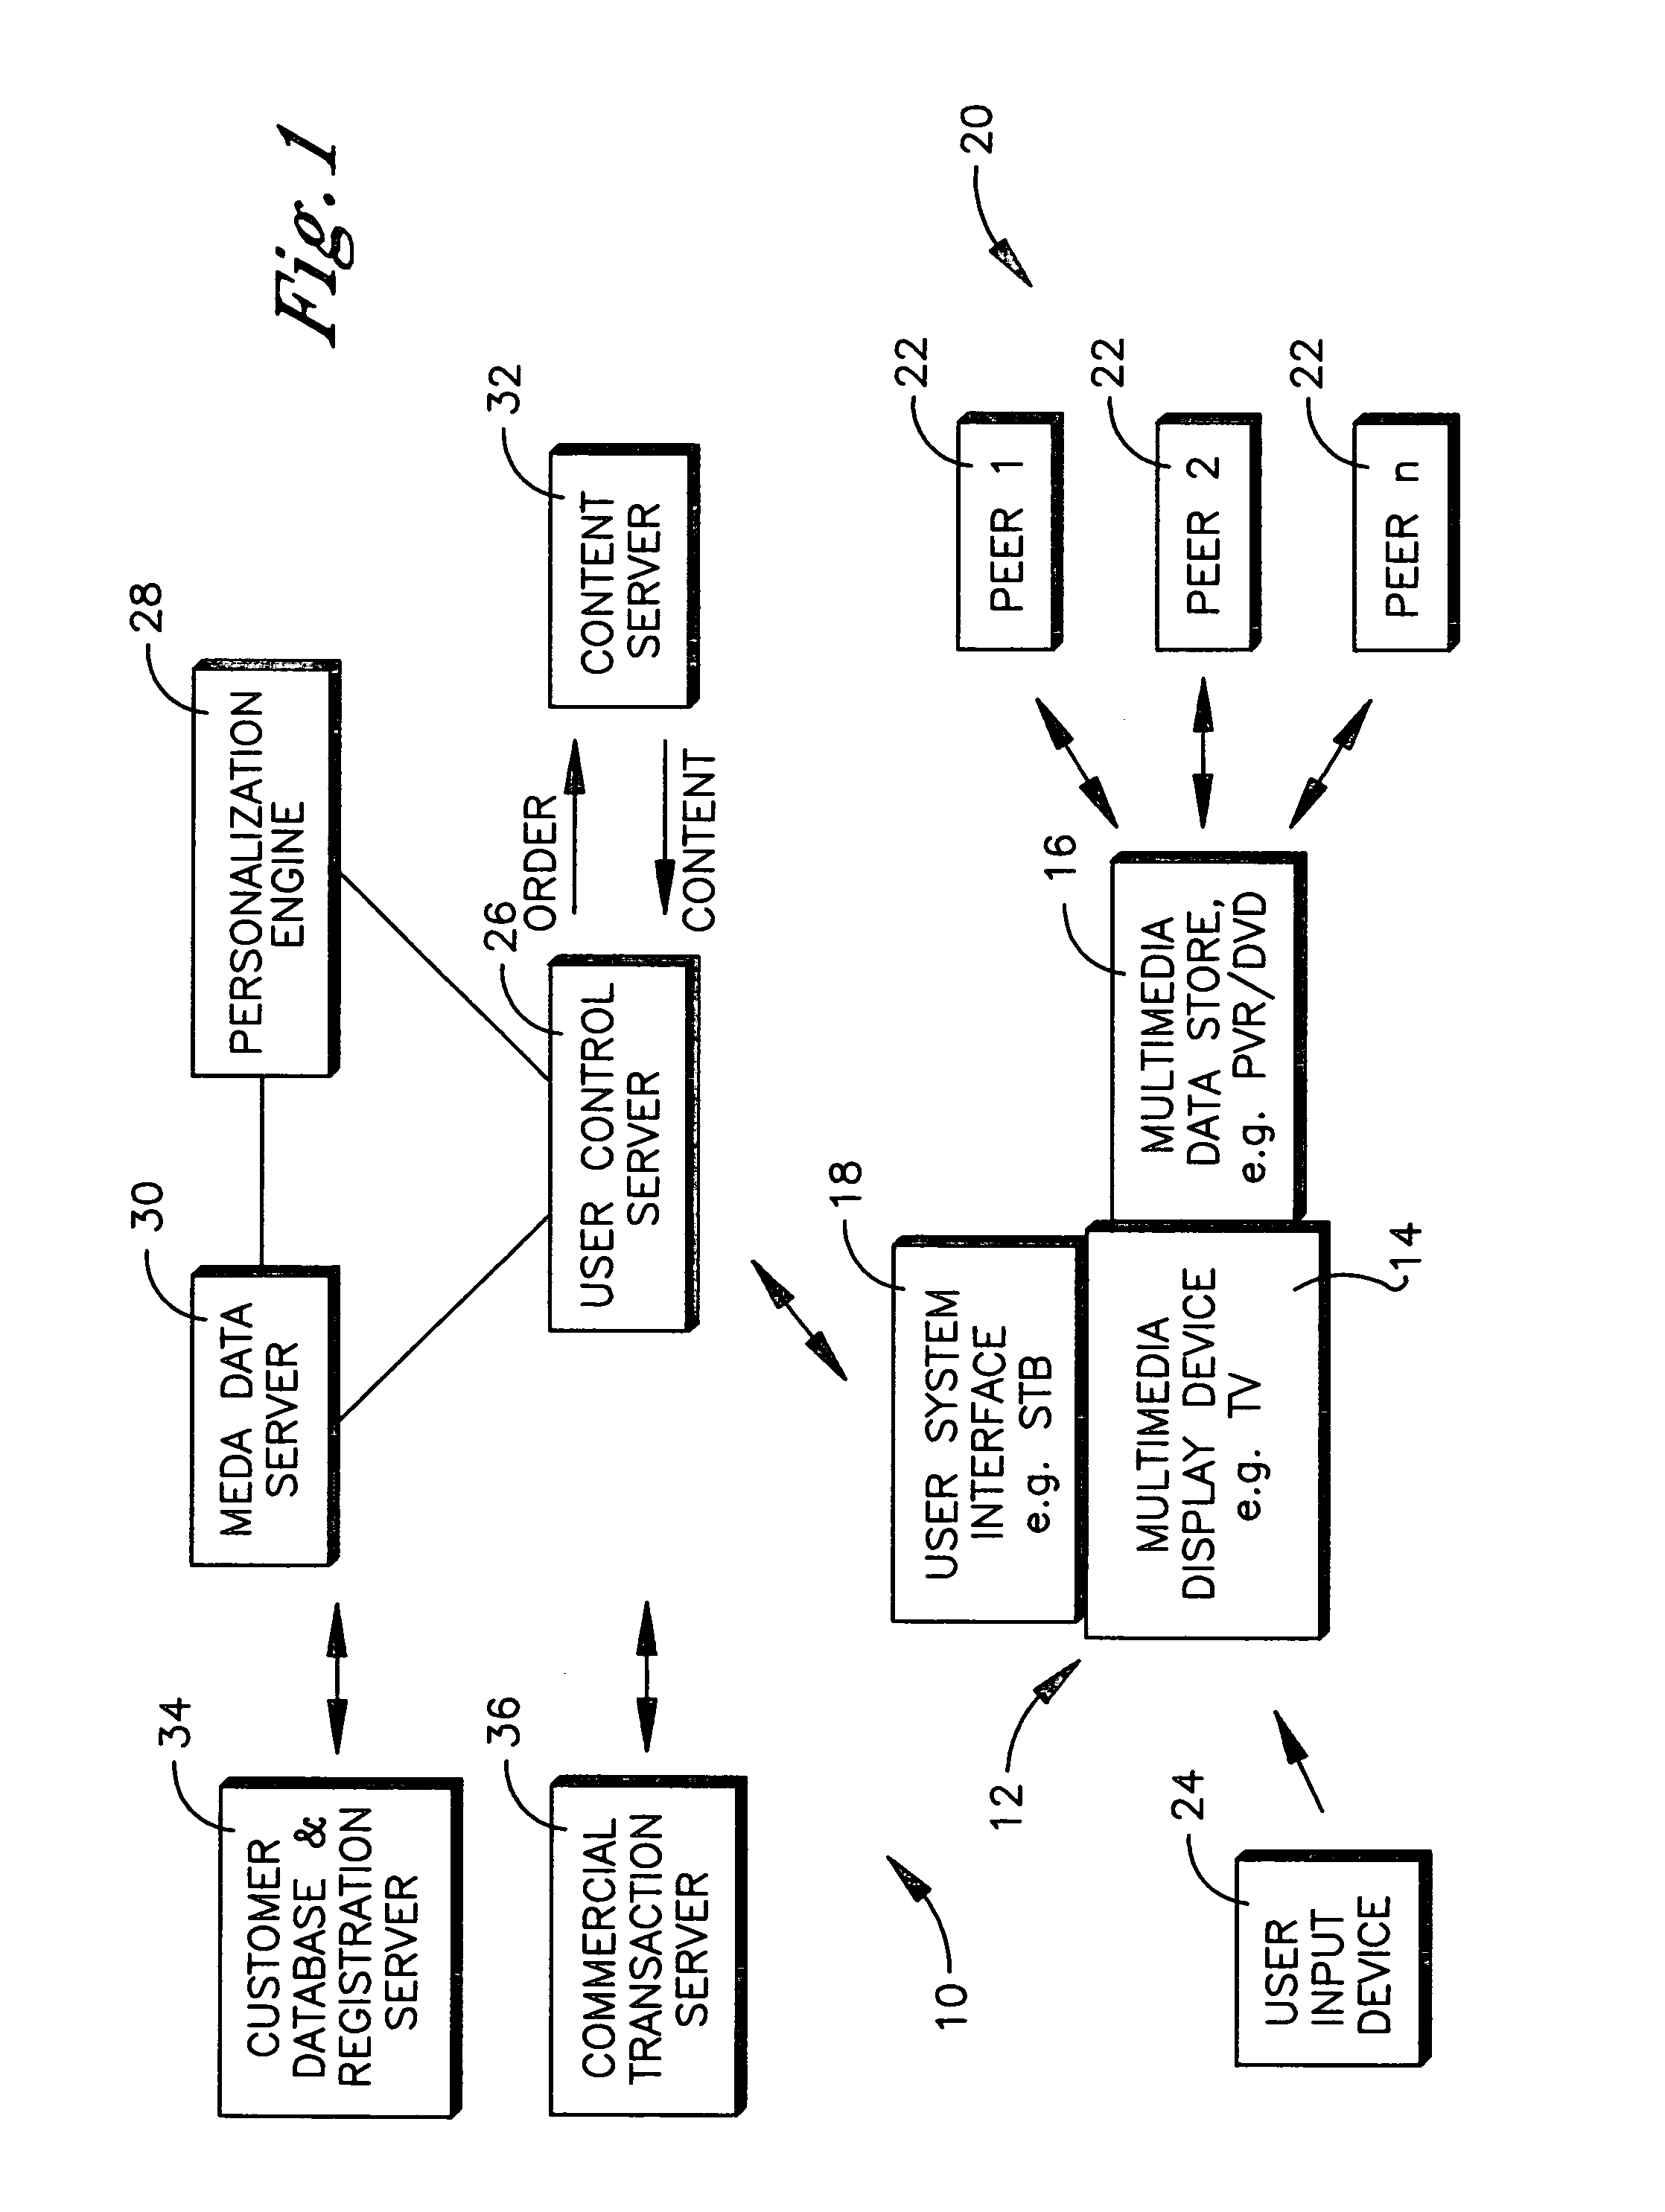 System and method for content delivery